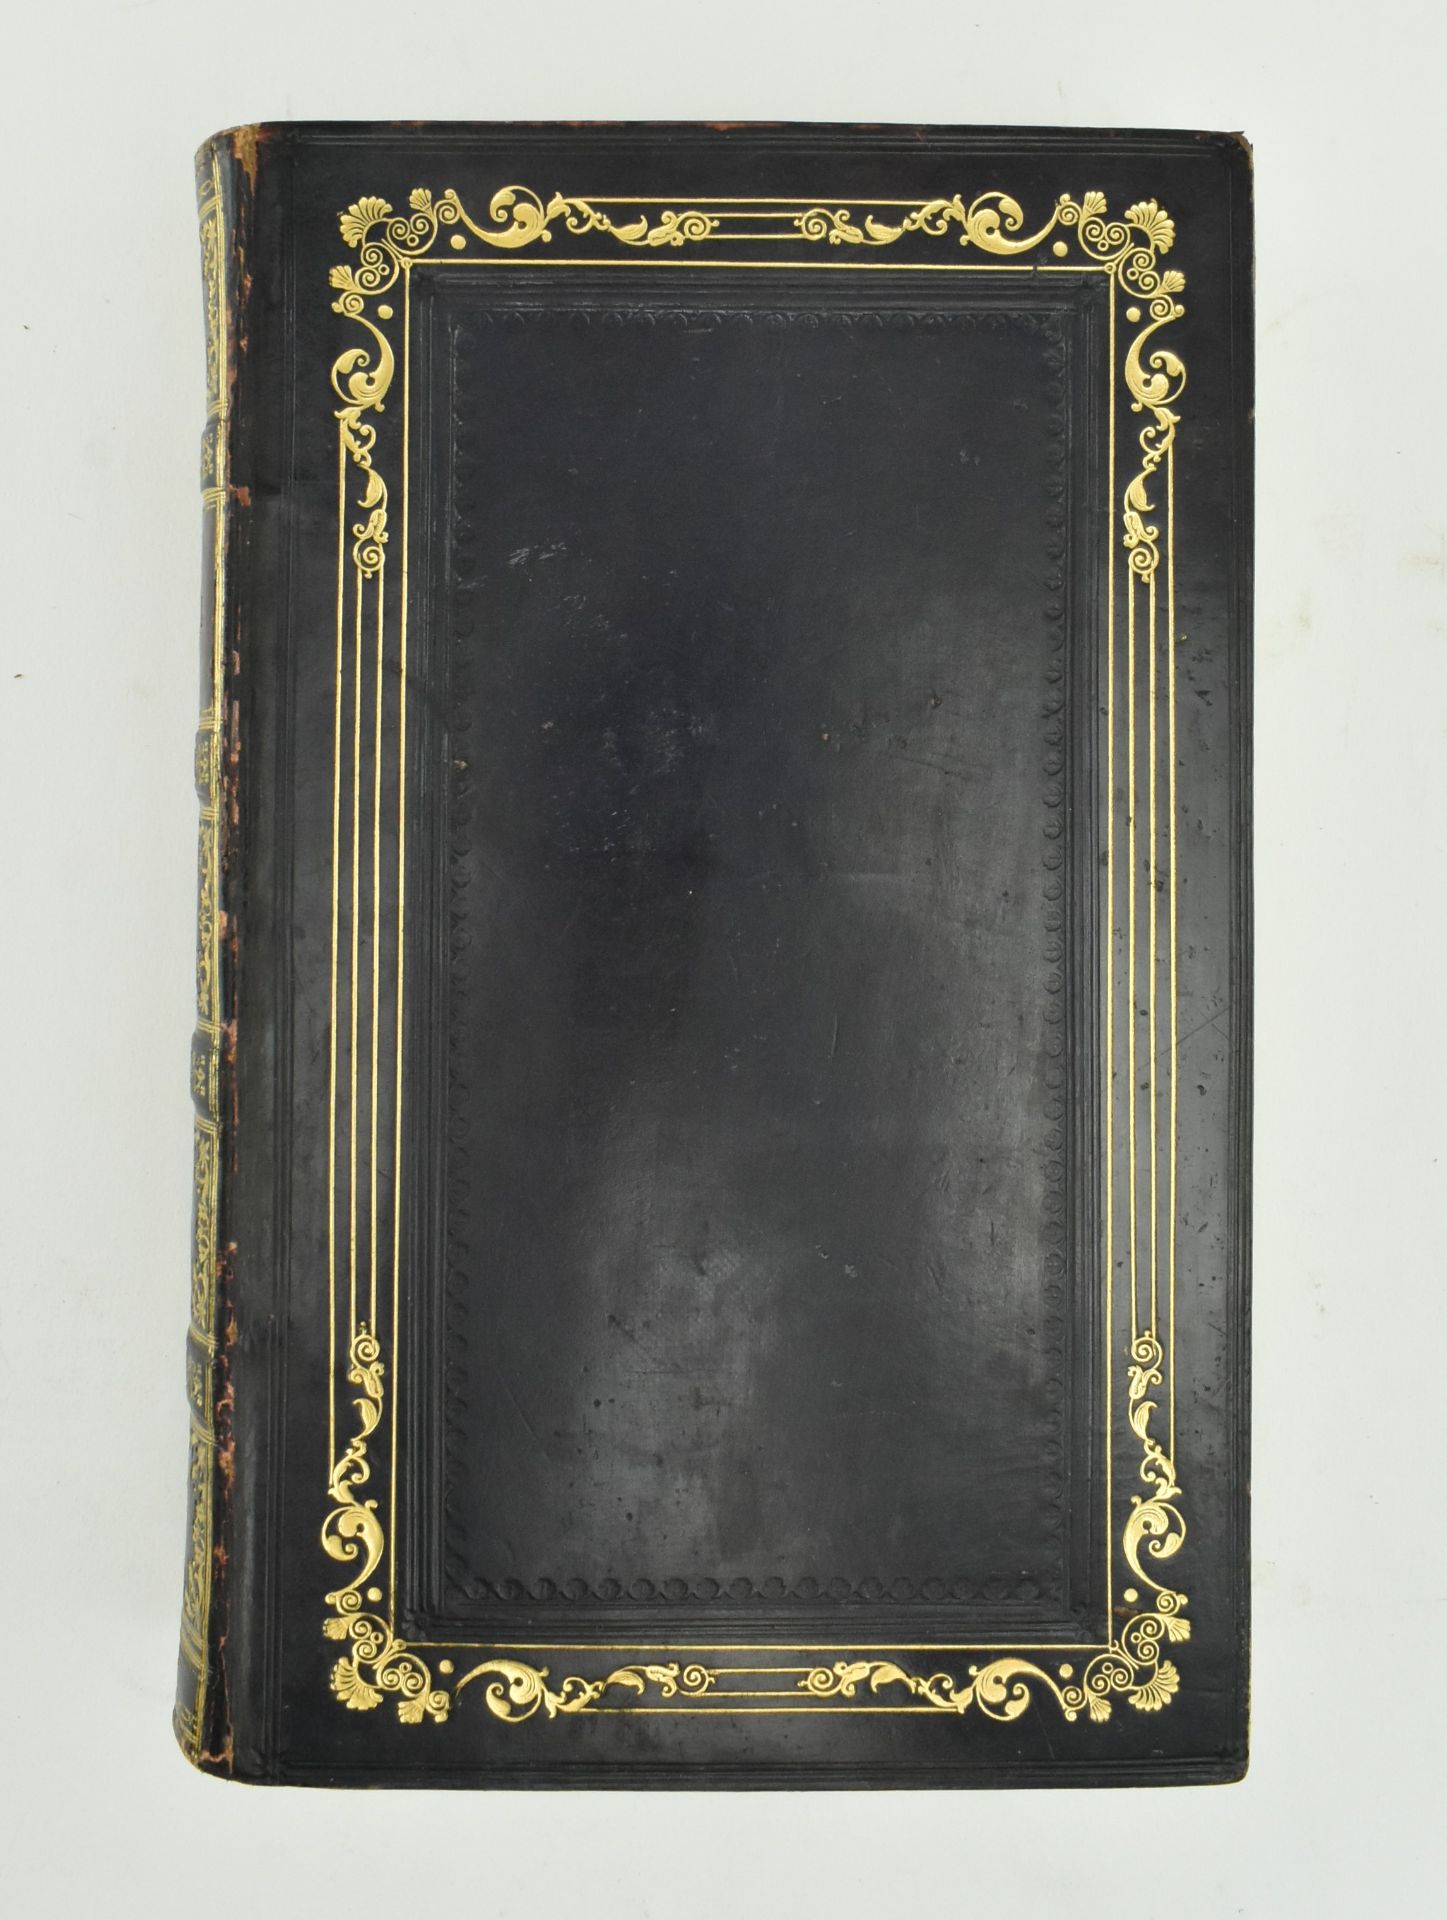 BINDINGS. COLLECTION OF VICTORIAN & LATER GILT LEATHER BINDINGS - Image 8 of 9